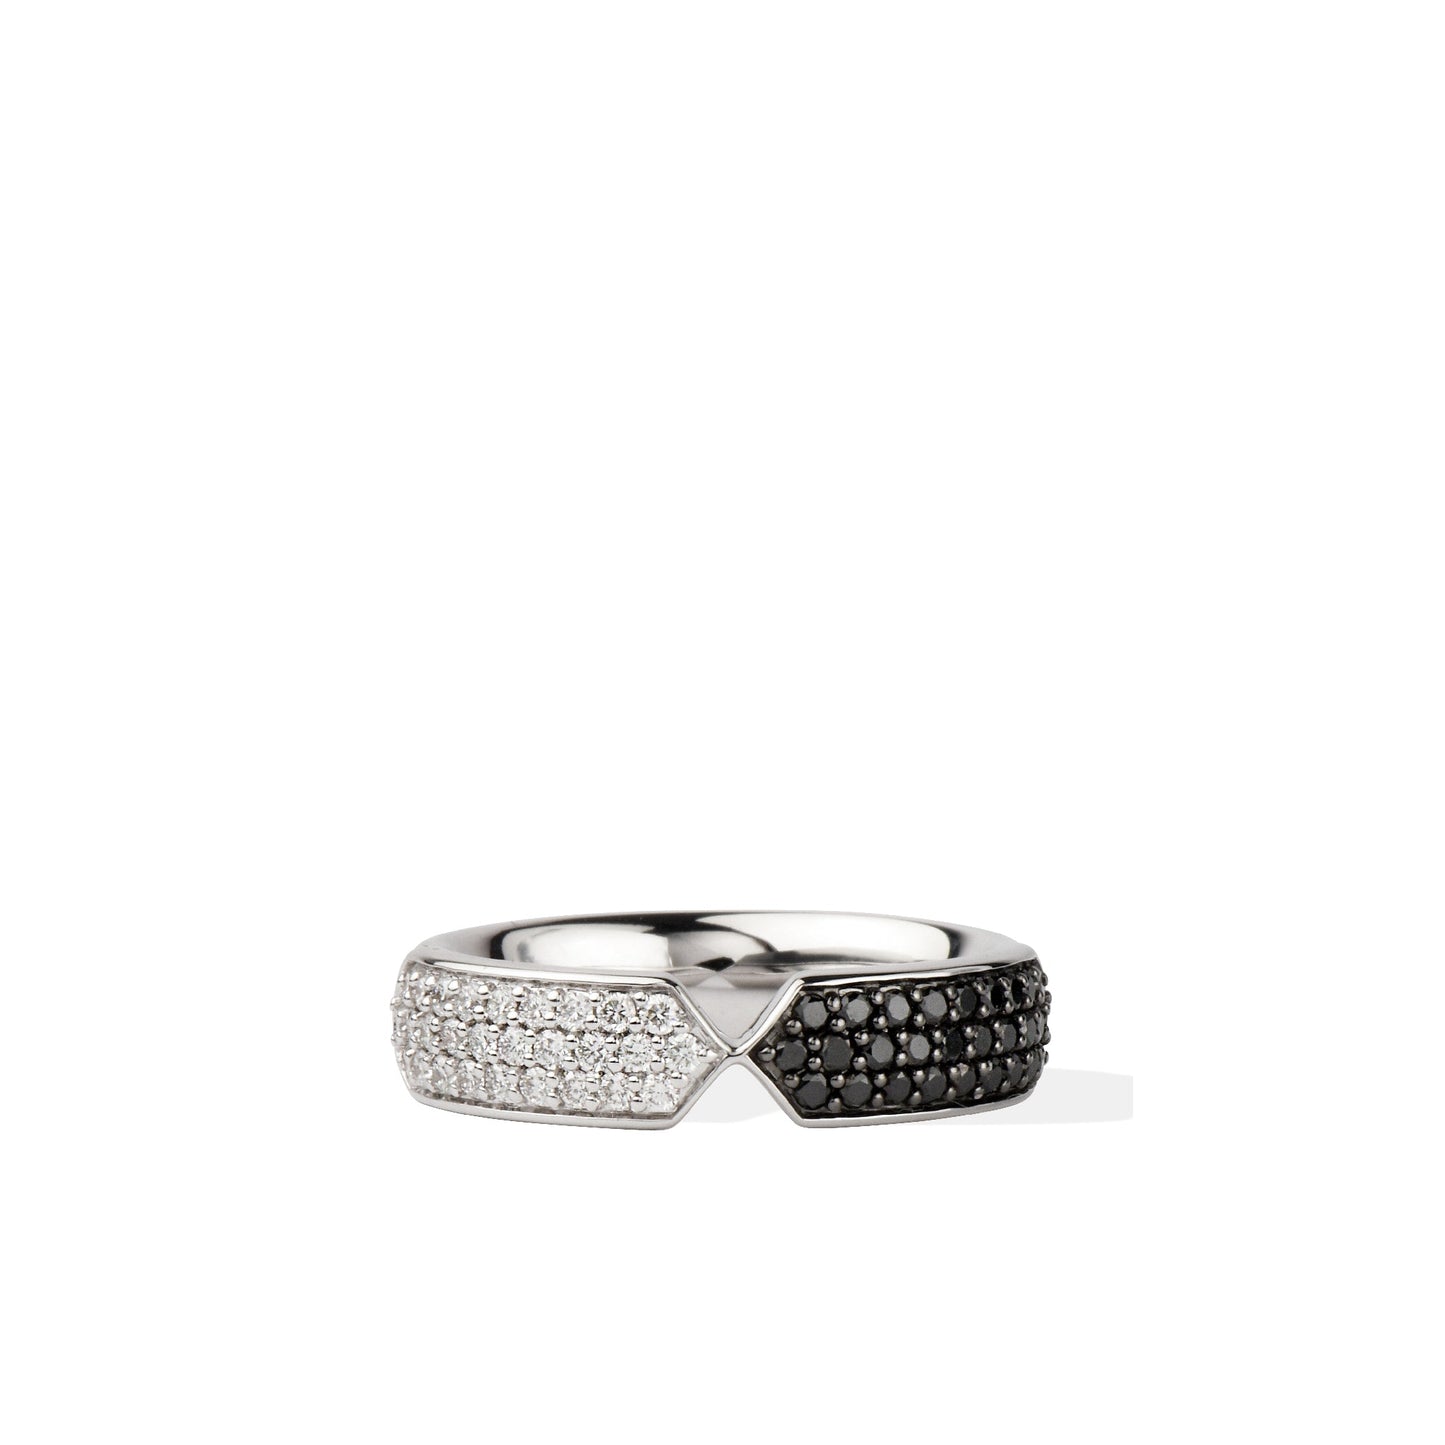 Silver Sapphire Ring | Pave Set Black & White Sapphire Sterling Silver Band